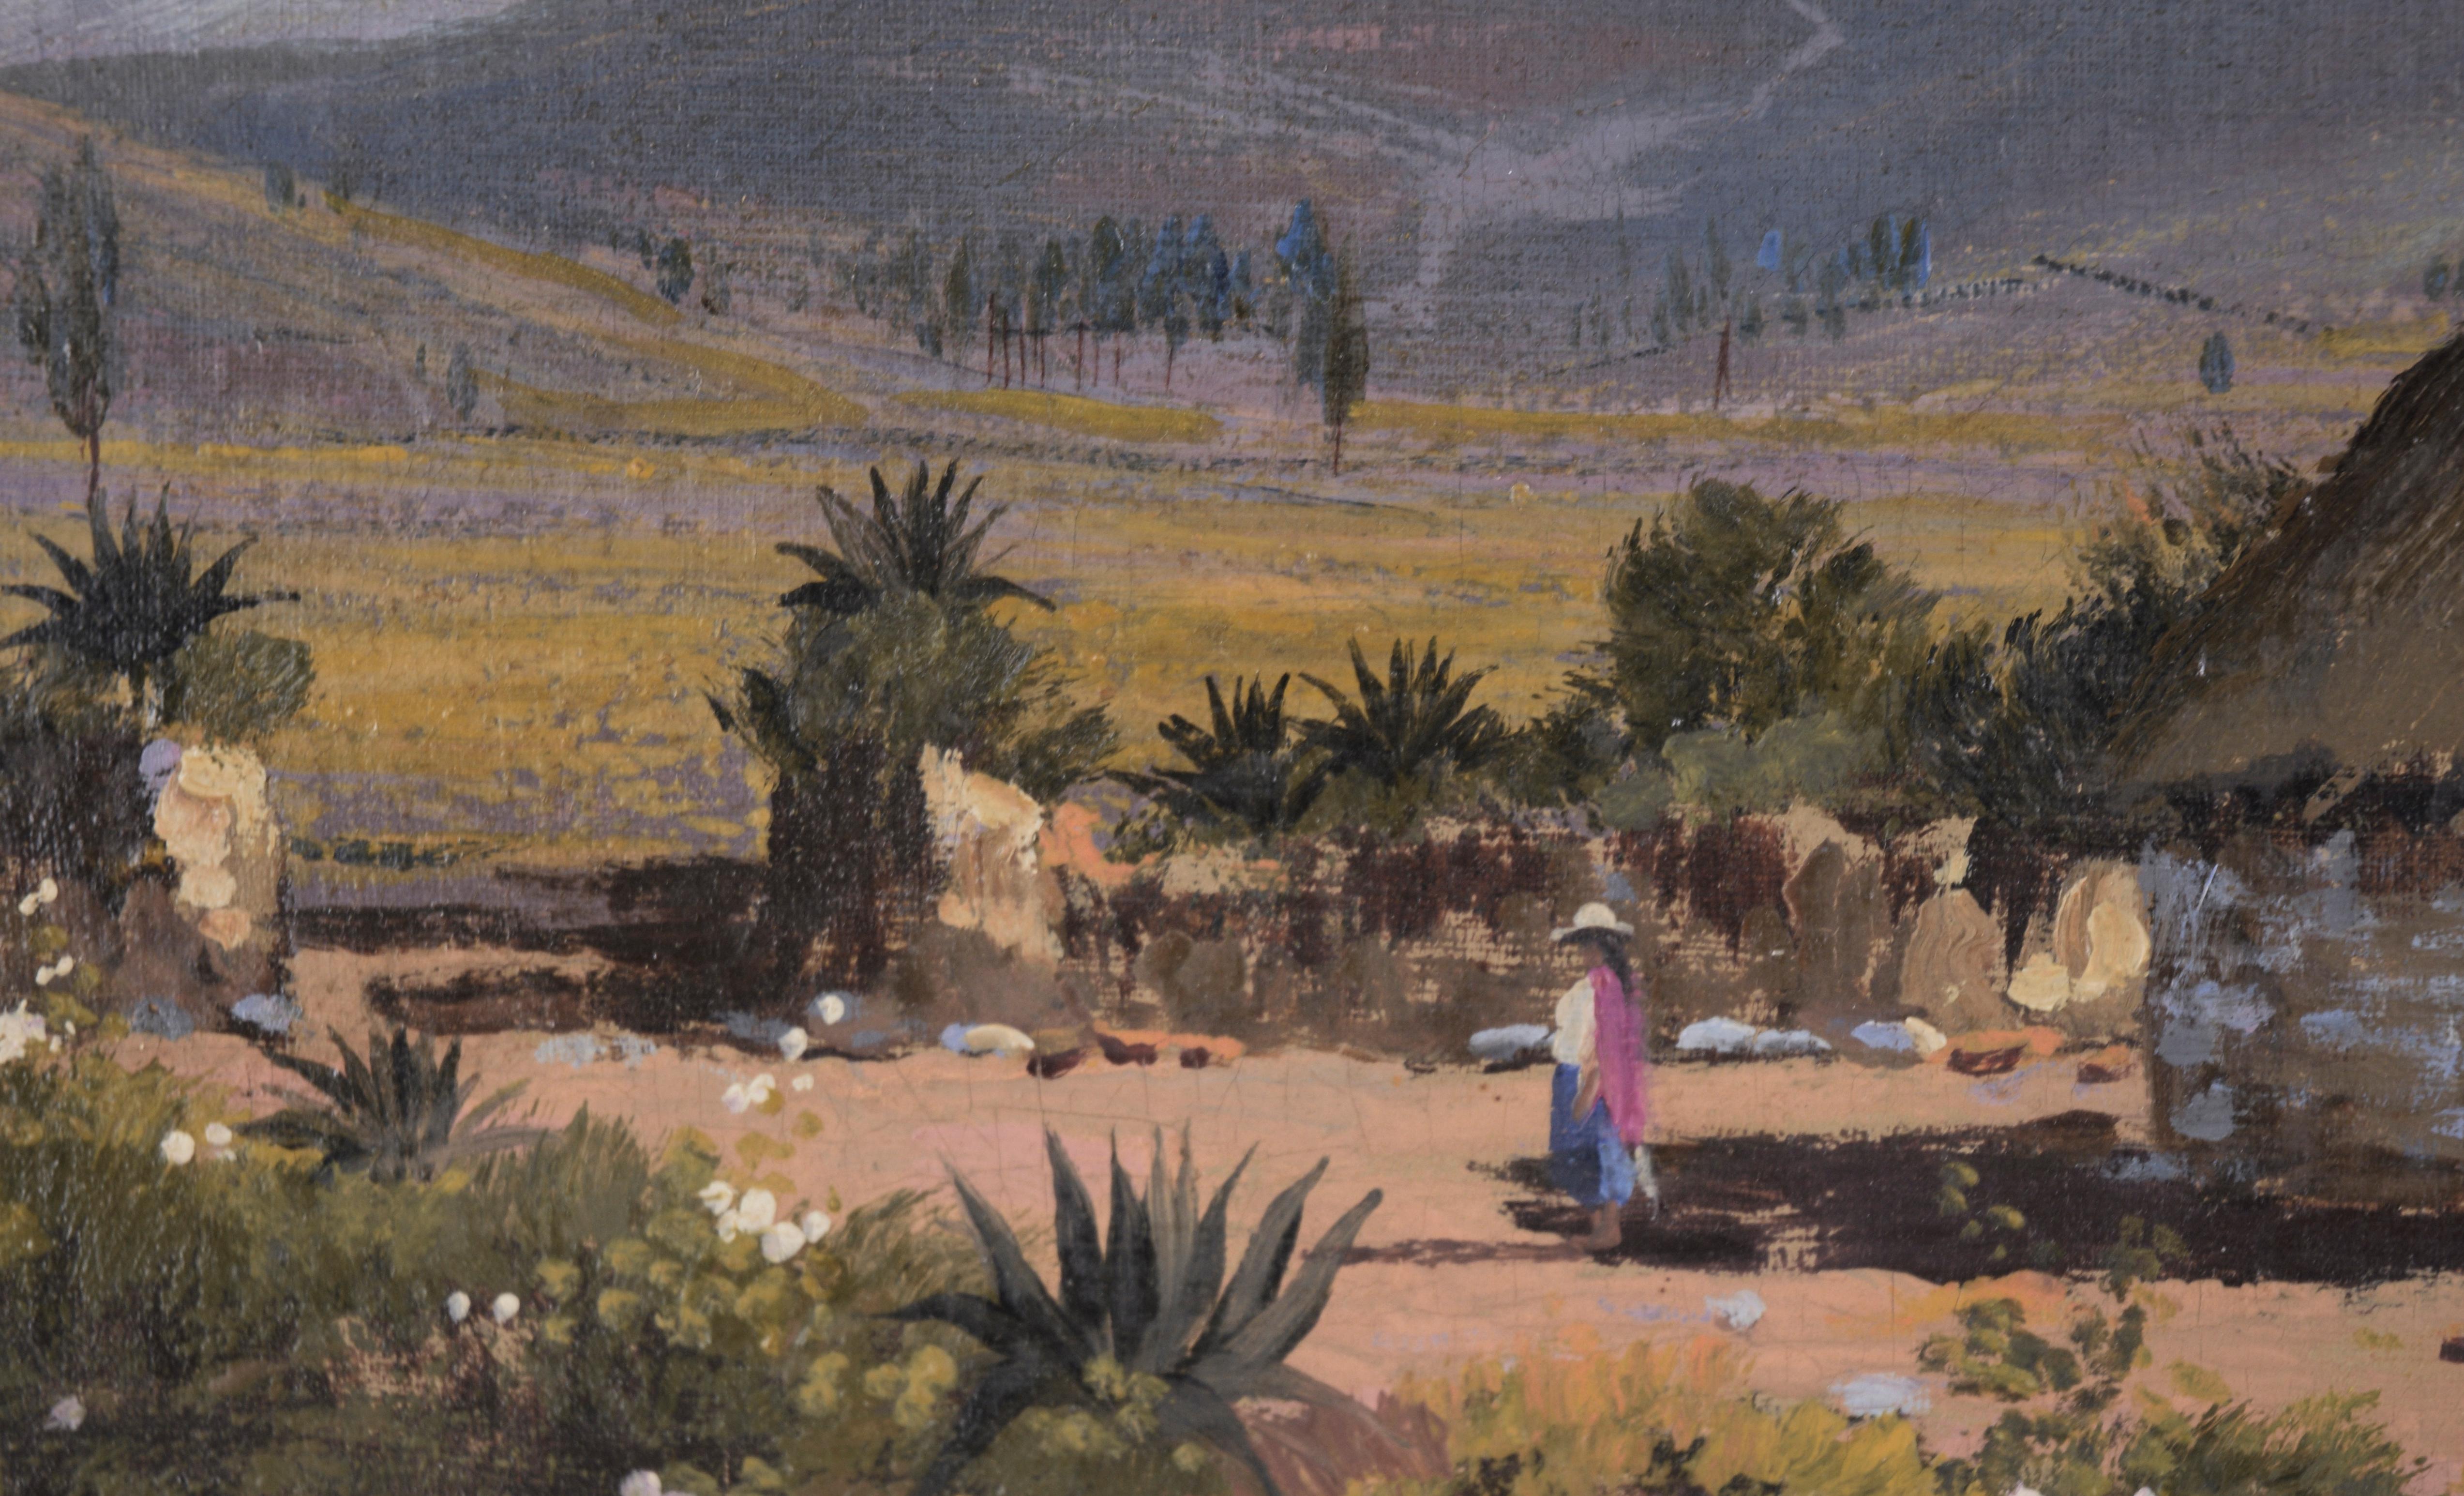 Peaceful depiction of the Ecuadorian Andes by Emilio Moncayo (Ecuadorian, 1895-1970). In the foreground are two traditional Ecuadorian homes, with people going about their daily lives. Beyond the village is a wide open field, leading to a small